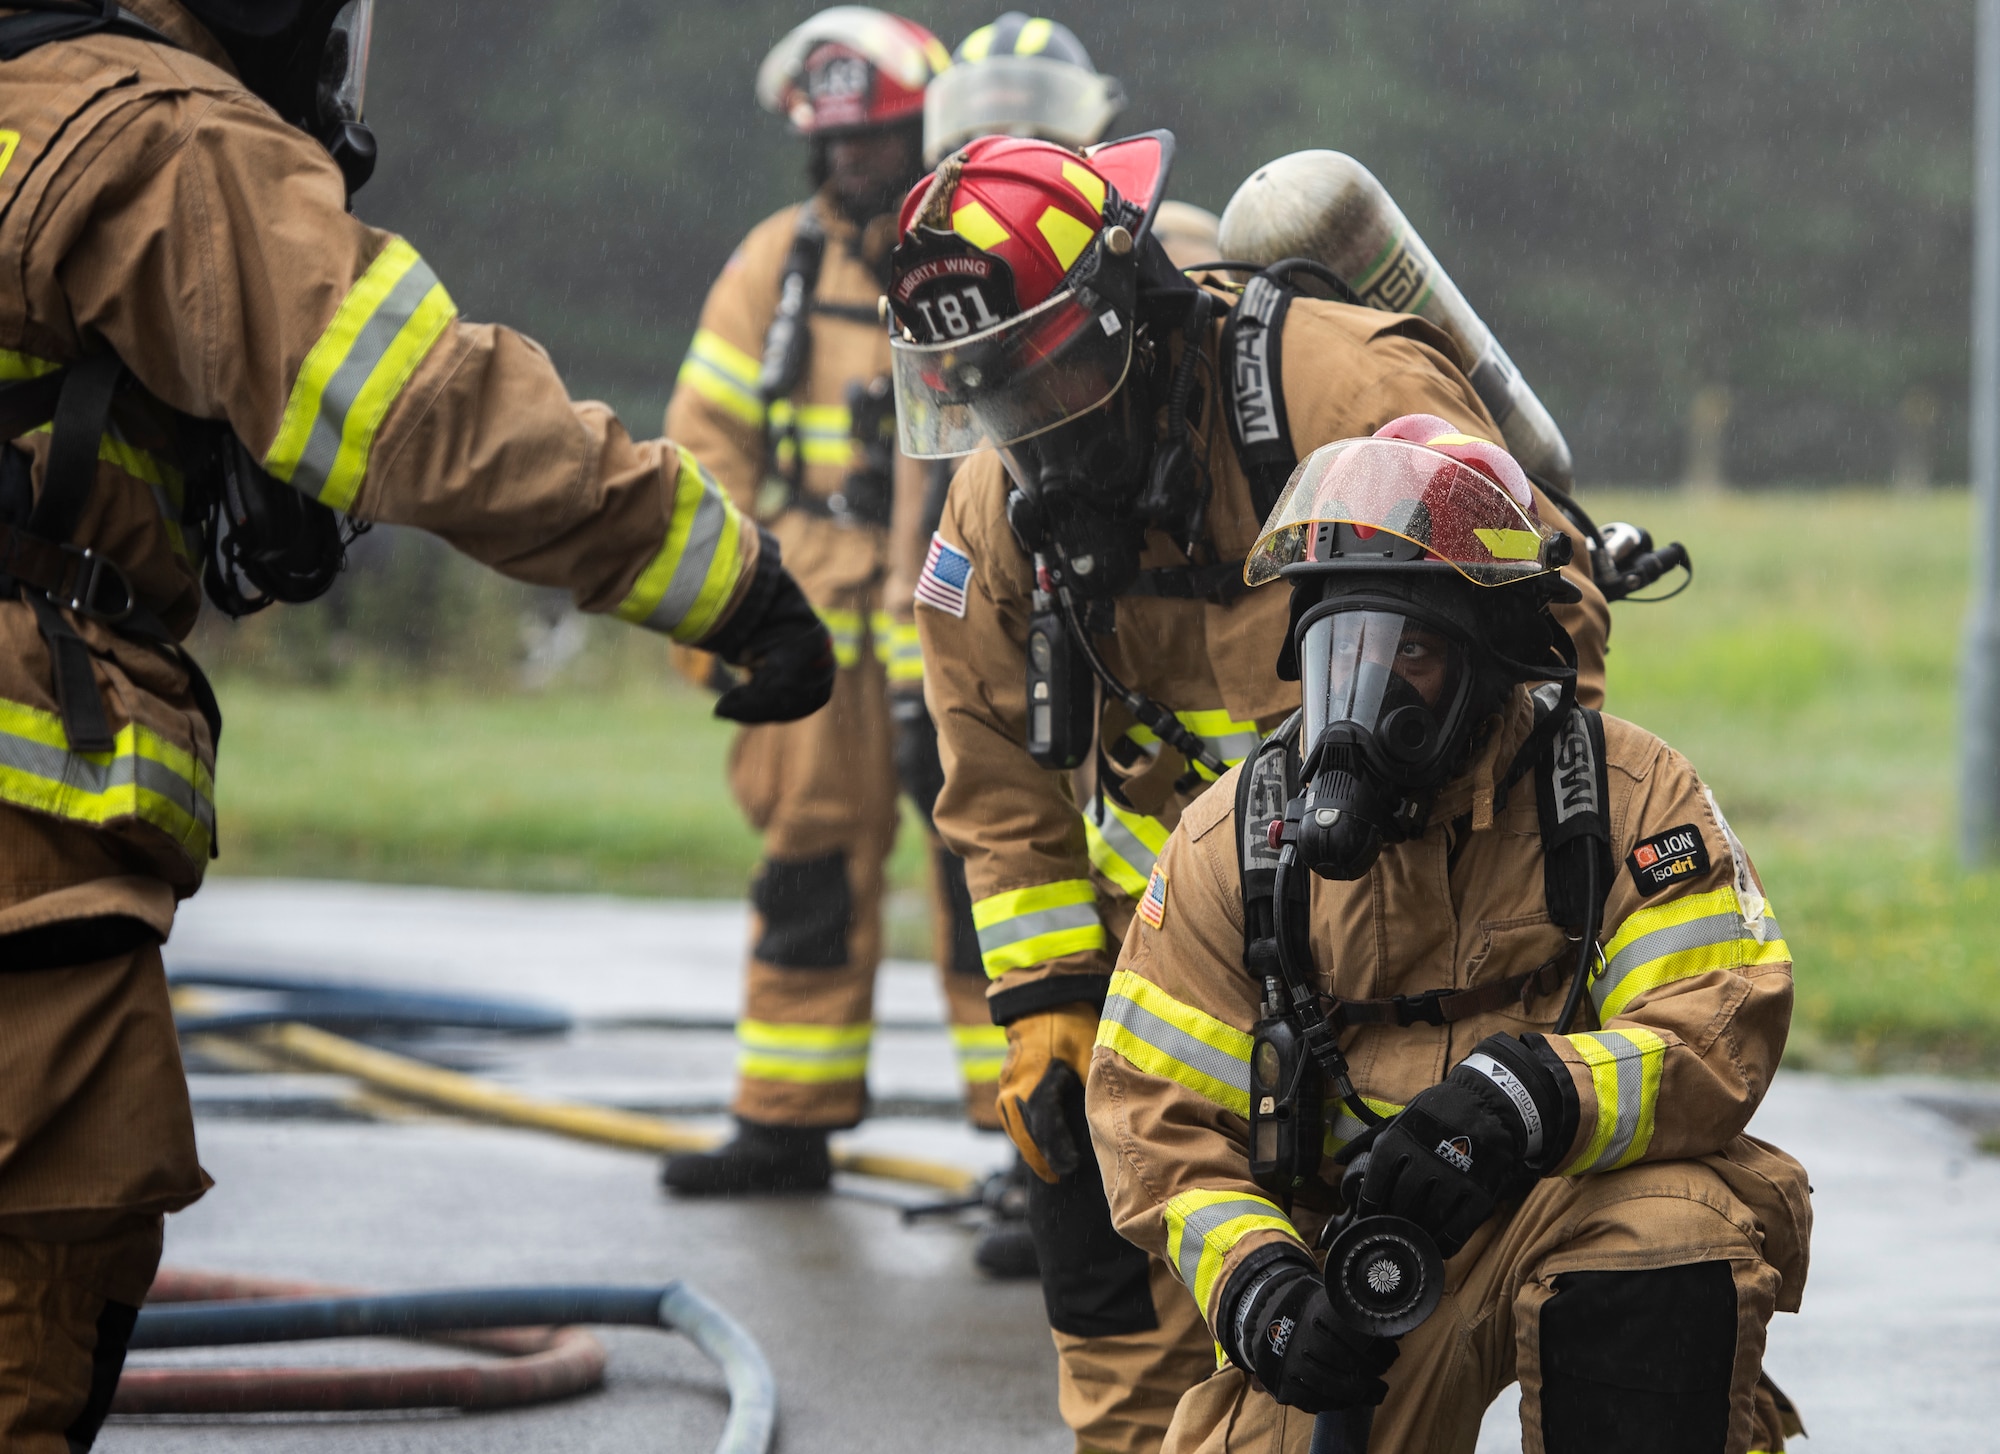 U.S. Air Force firefighters assigned to the 48th Civil Engineering Squadron prepare to participate in a controlled burn training exercise at Royal Air Force Lakenheath, England, July 8, 2020. Liberty wing firefighters participate in live fire and smoke training quarterly to ensure readiness for real-world situations. (U.S. Air Force photo by Airman 1st Class Jessi Monte)